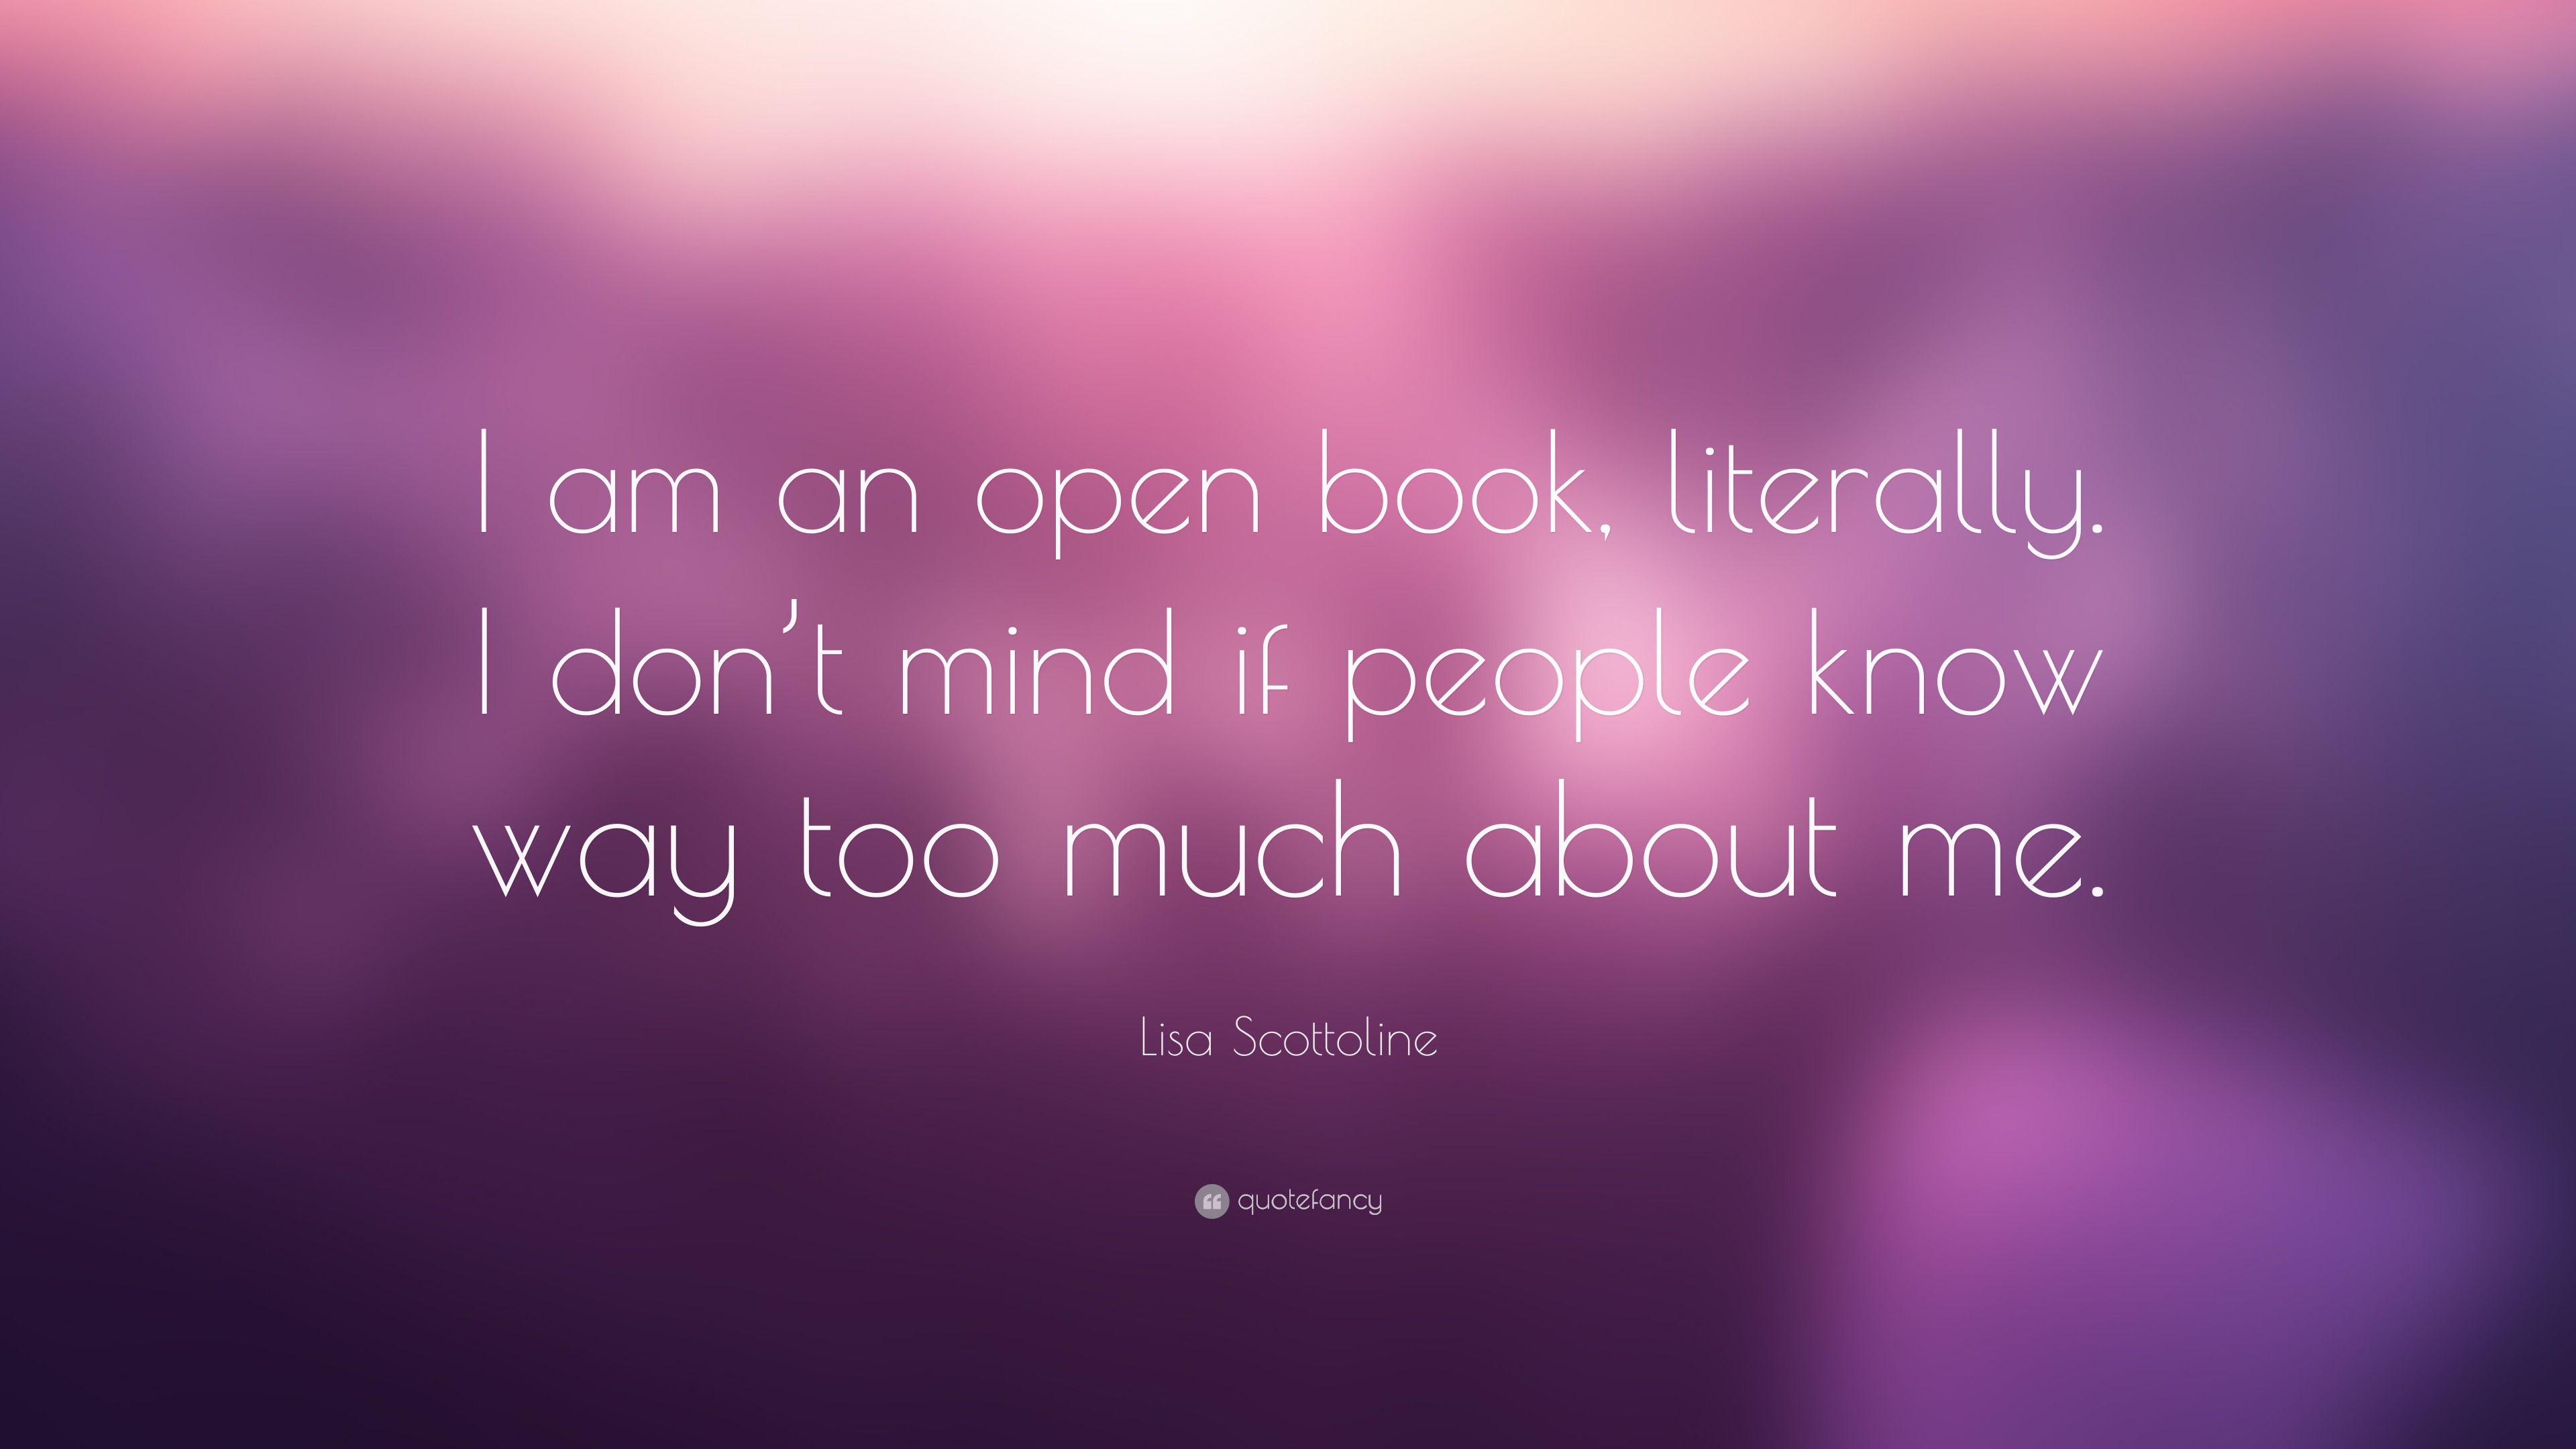 Lisa Scottoline Quote: “I Am An Open Book, Literally. I Don't Mind If People Know